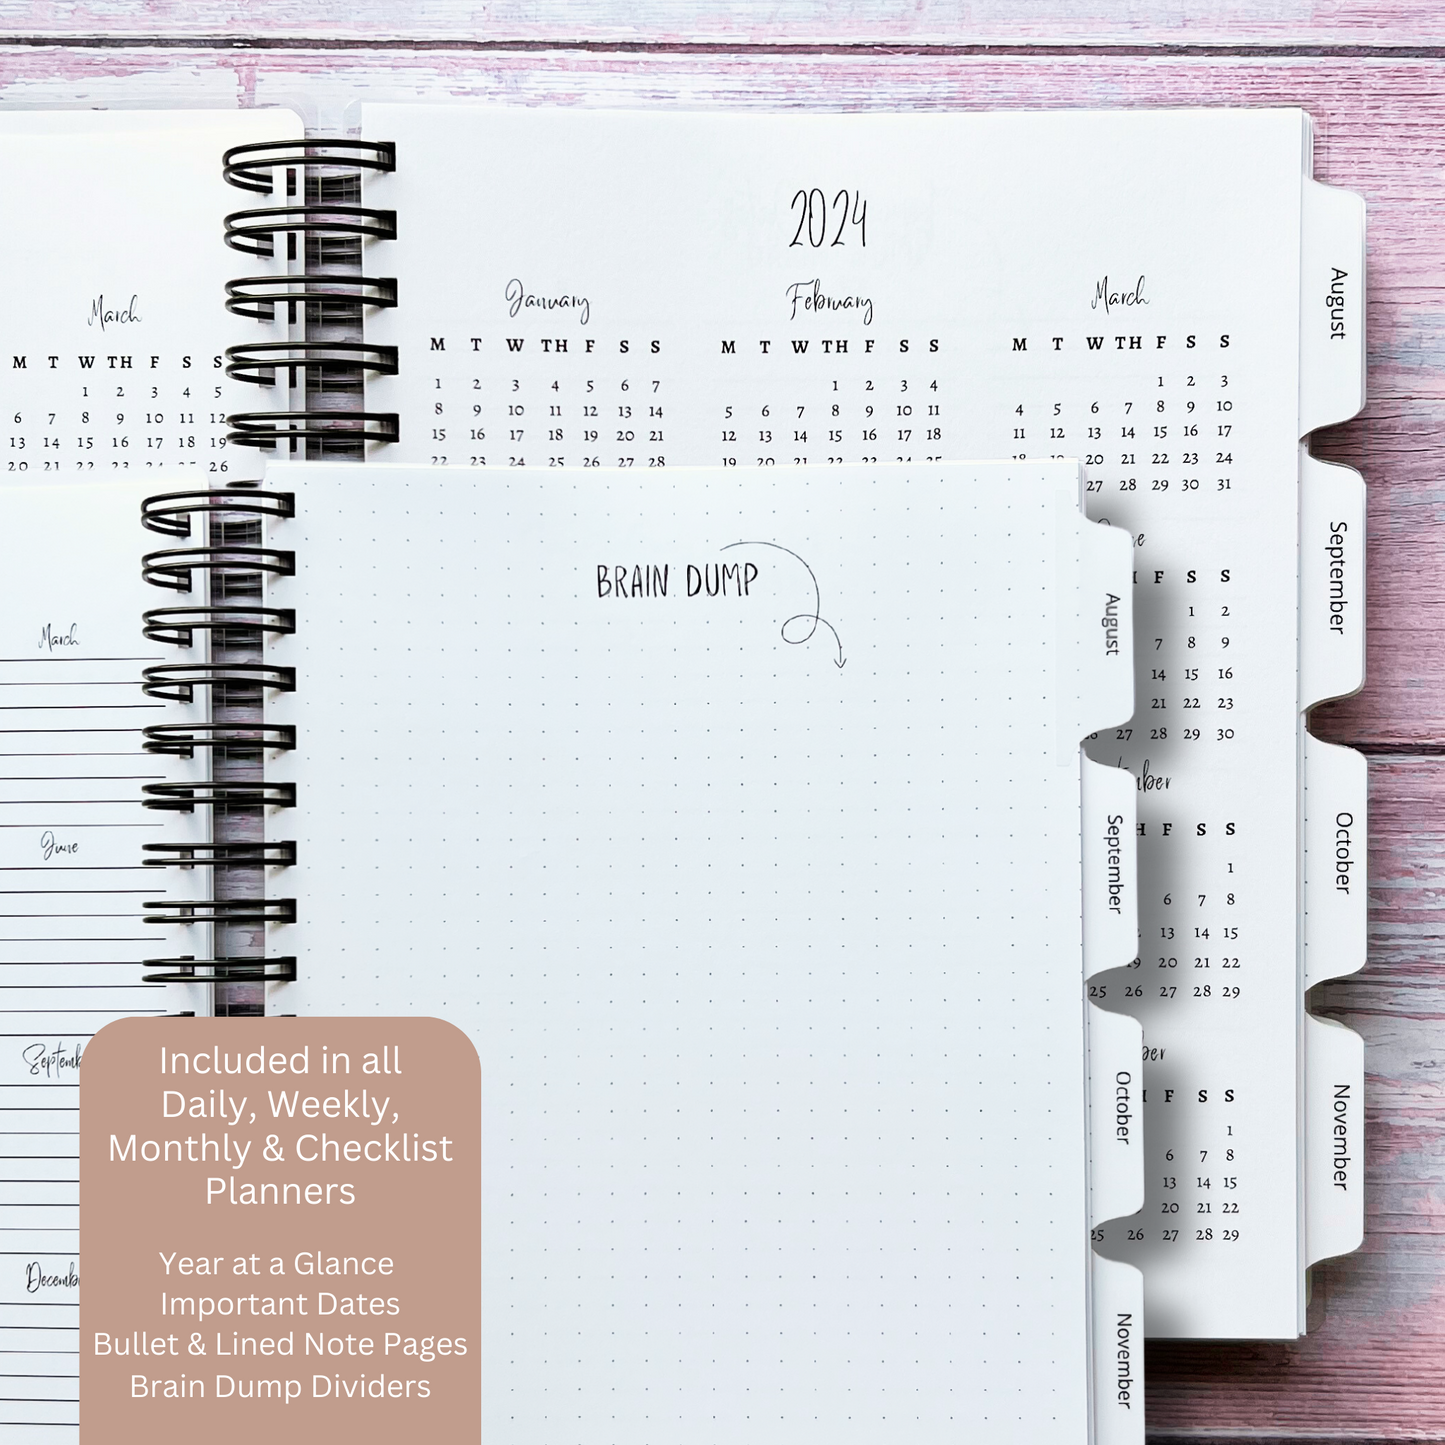 Personalized Monthly Planner - Mystical Spells